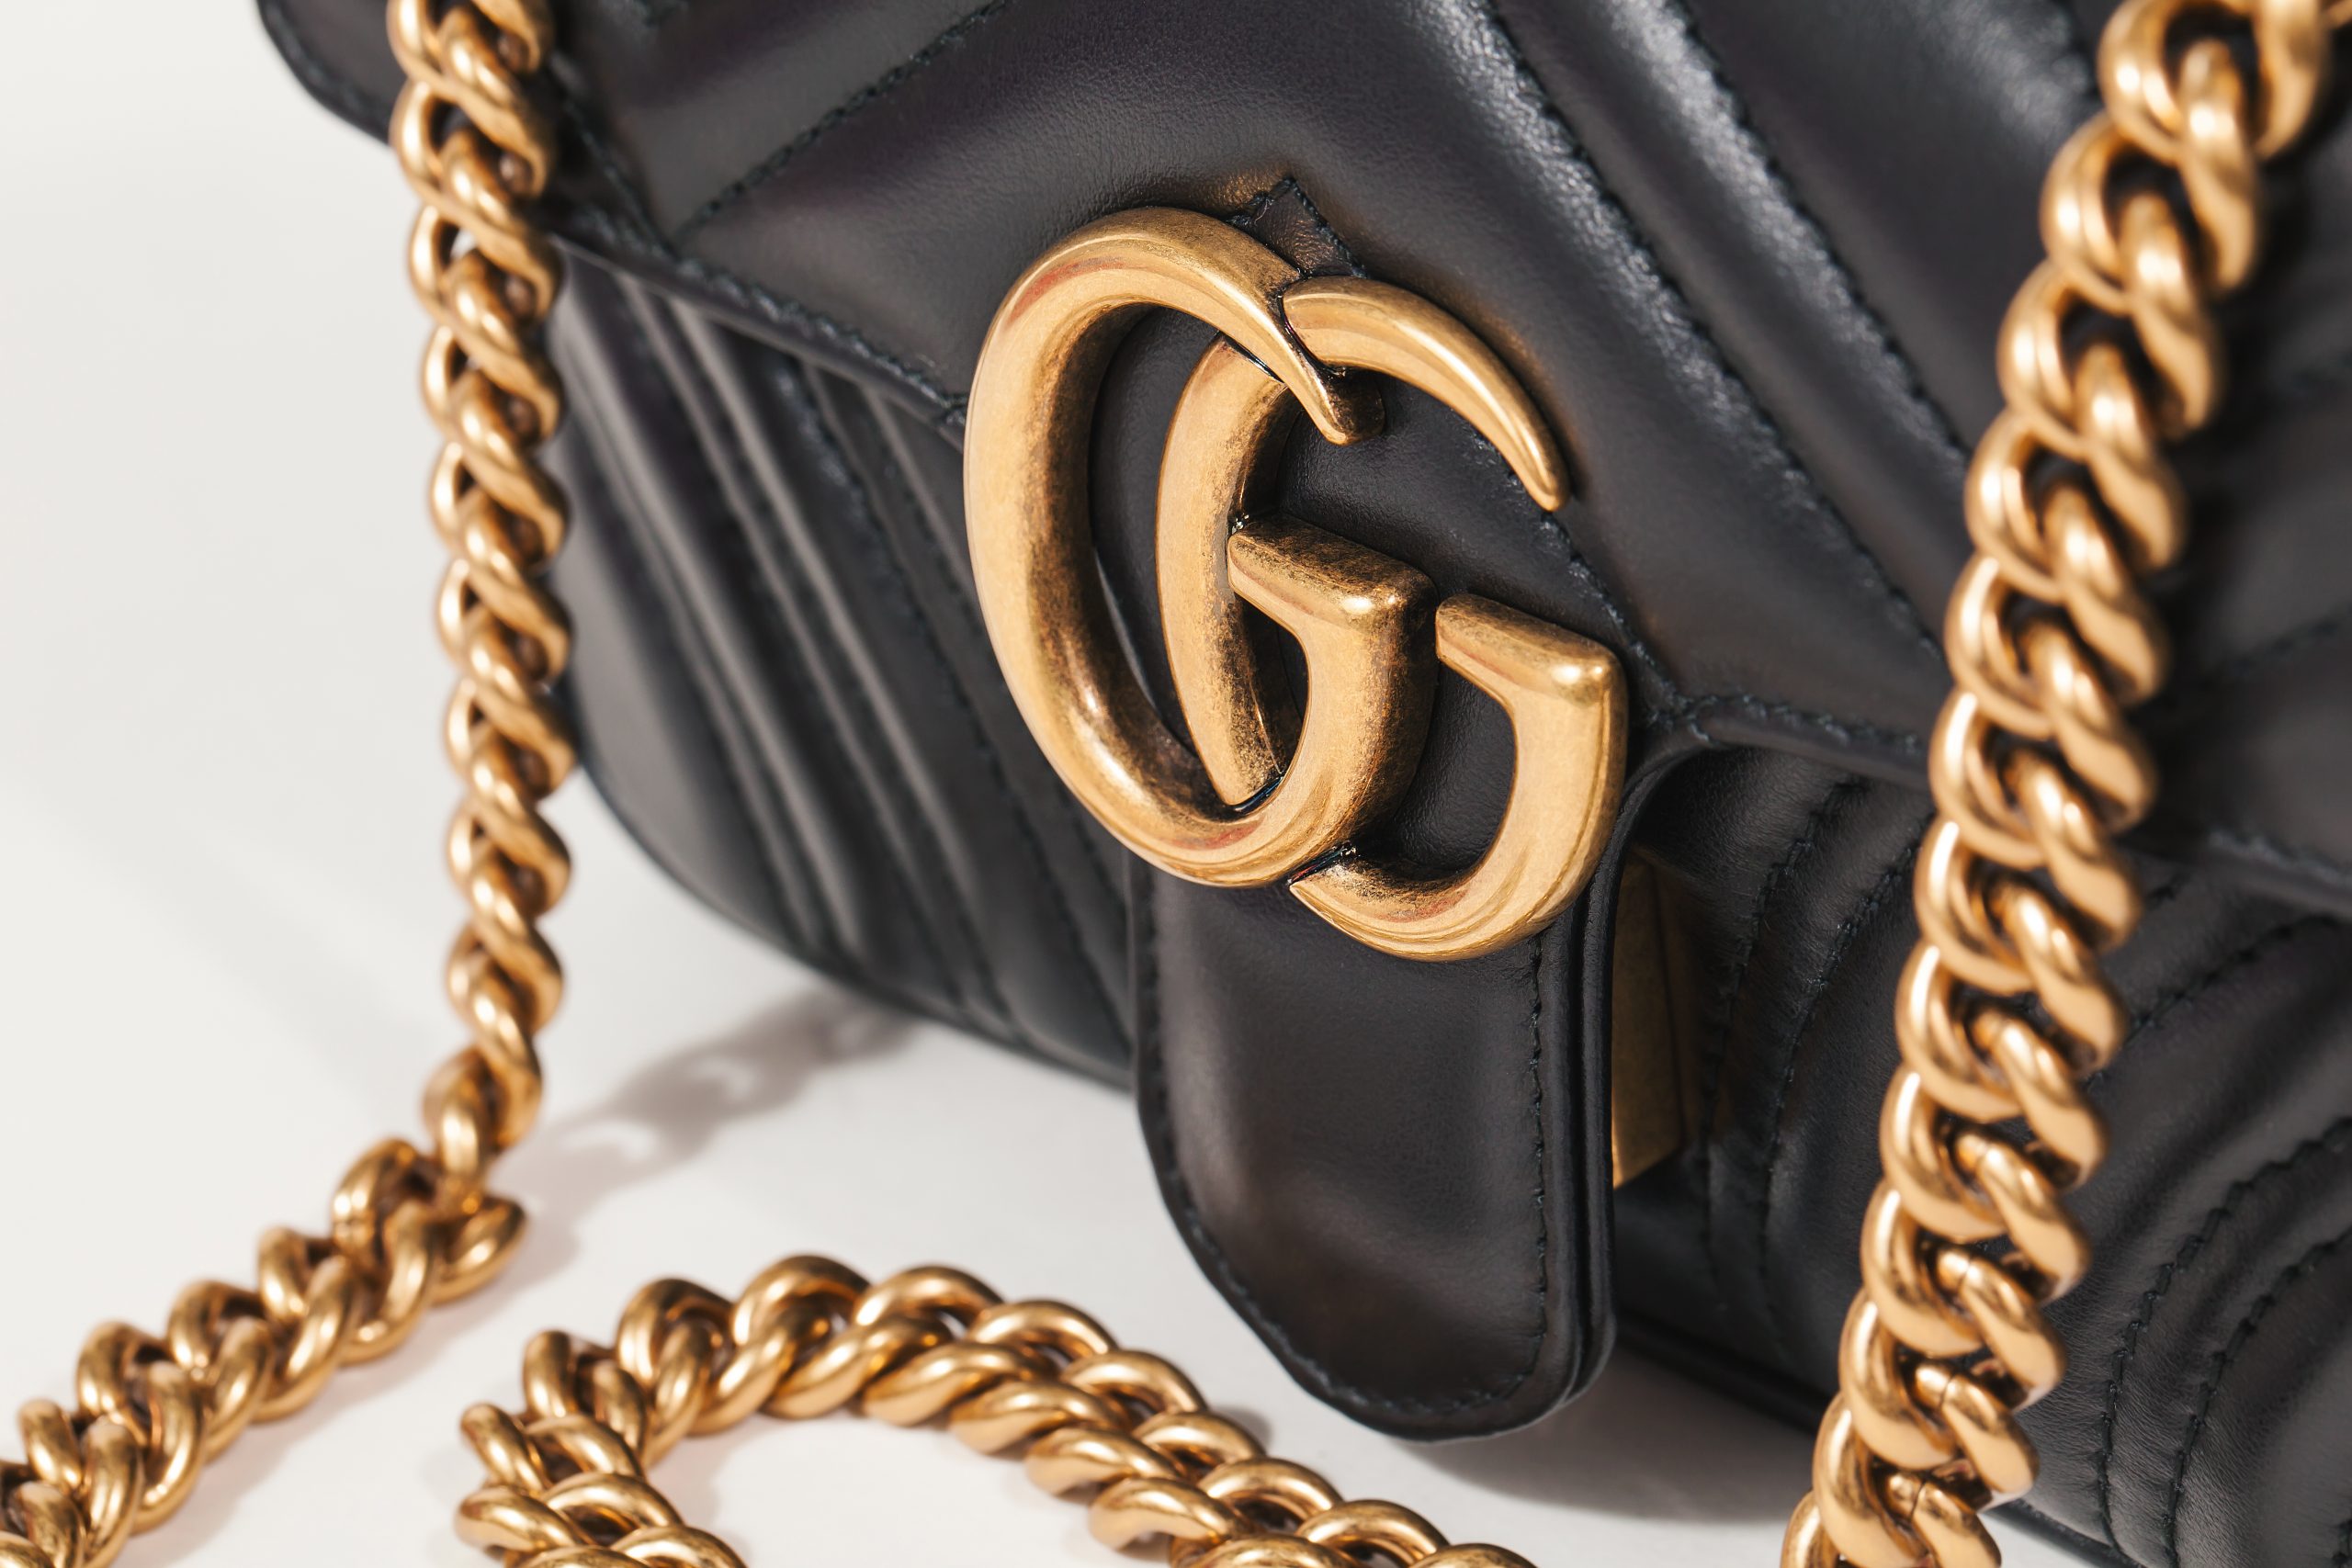 Most Popular Gucci Bags Of All Time | Top Gucci Bags | Diamond Banc